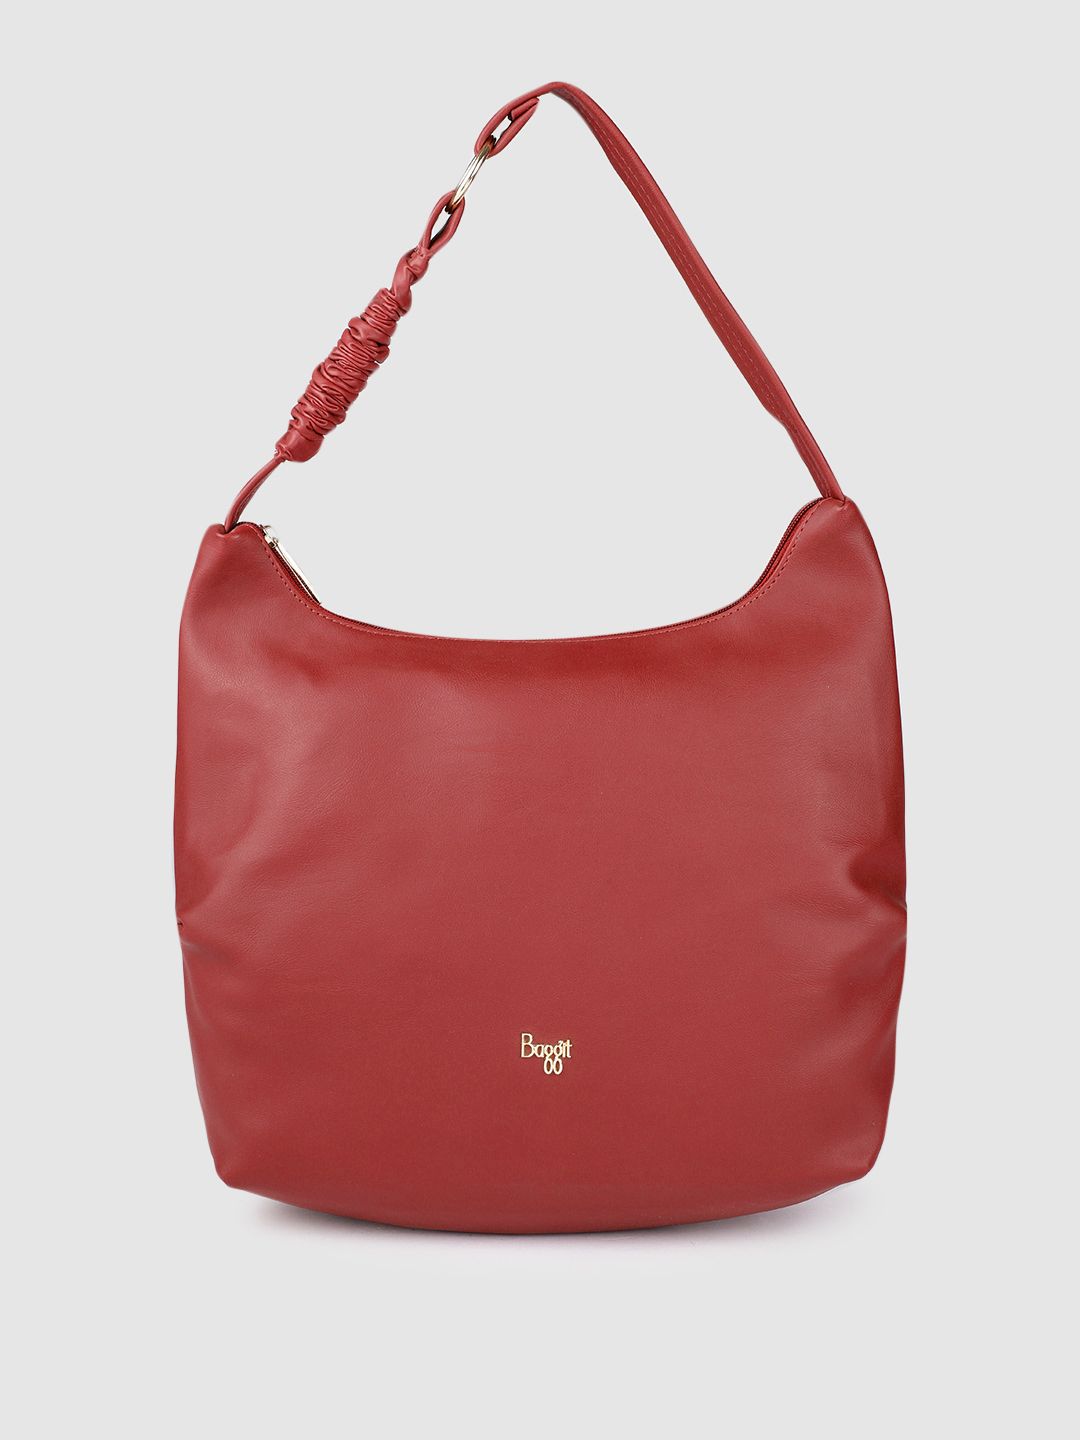 Baggit Red Structured Hobo Bag Price in India